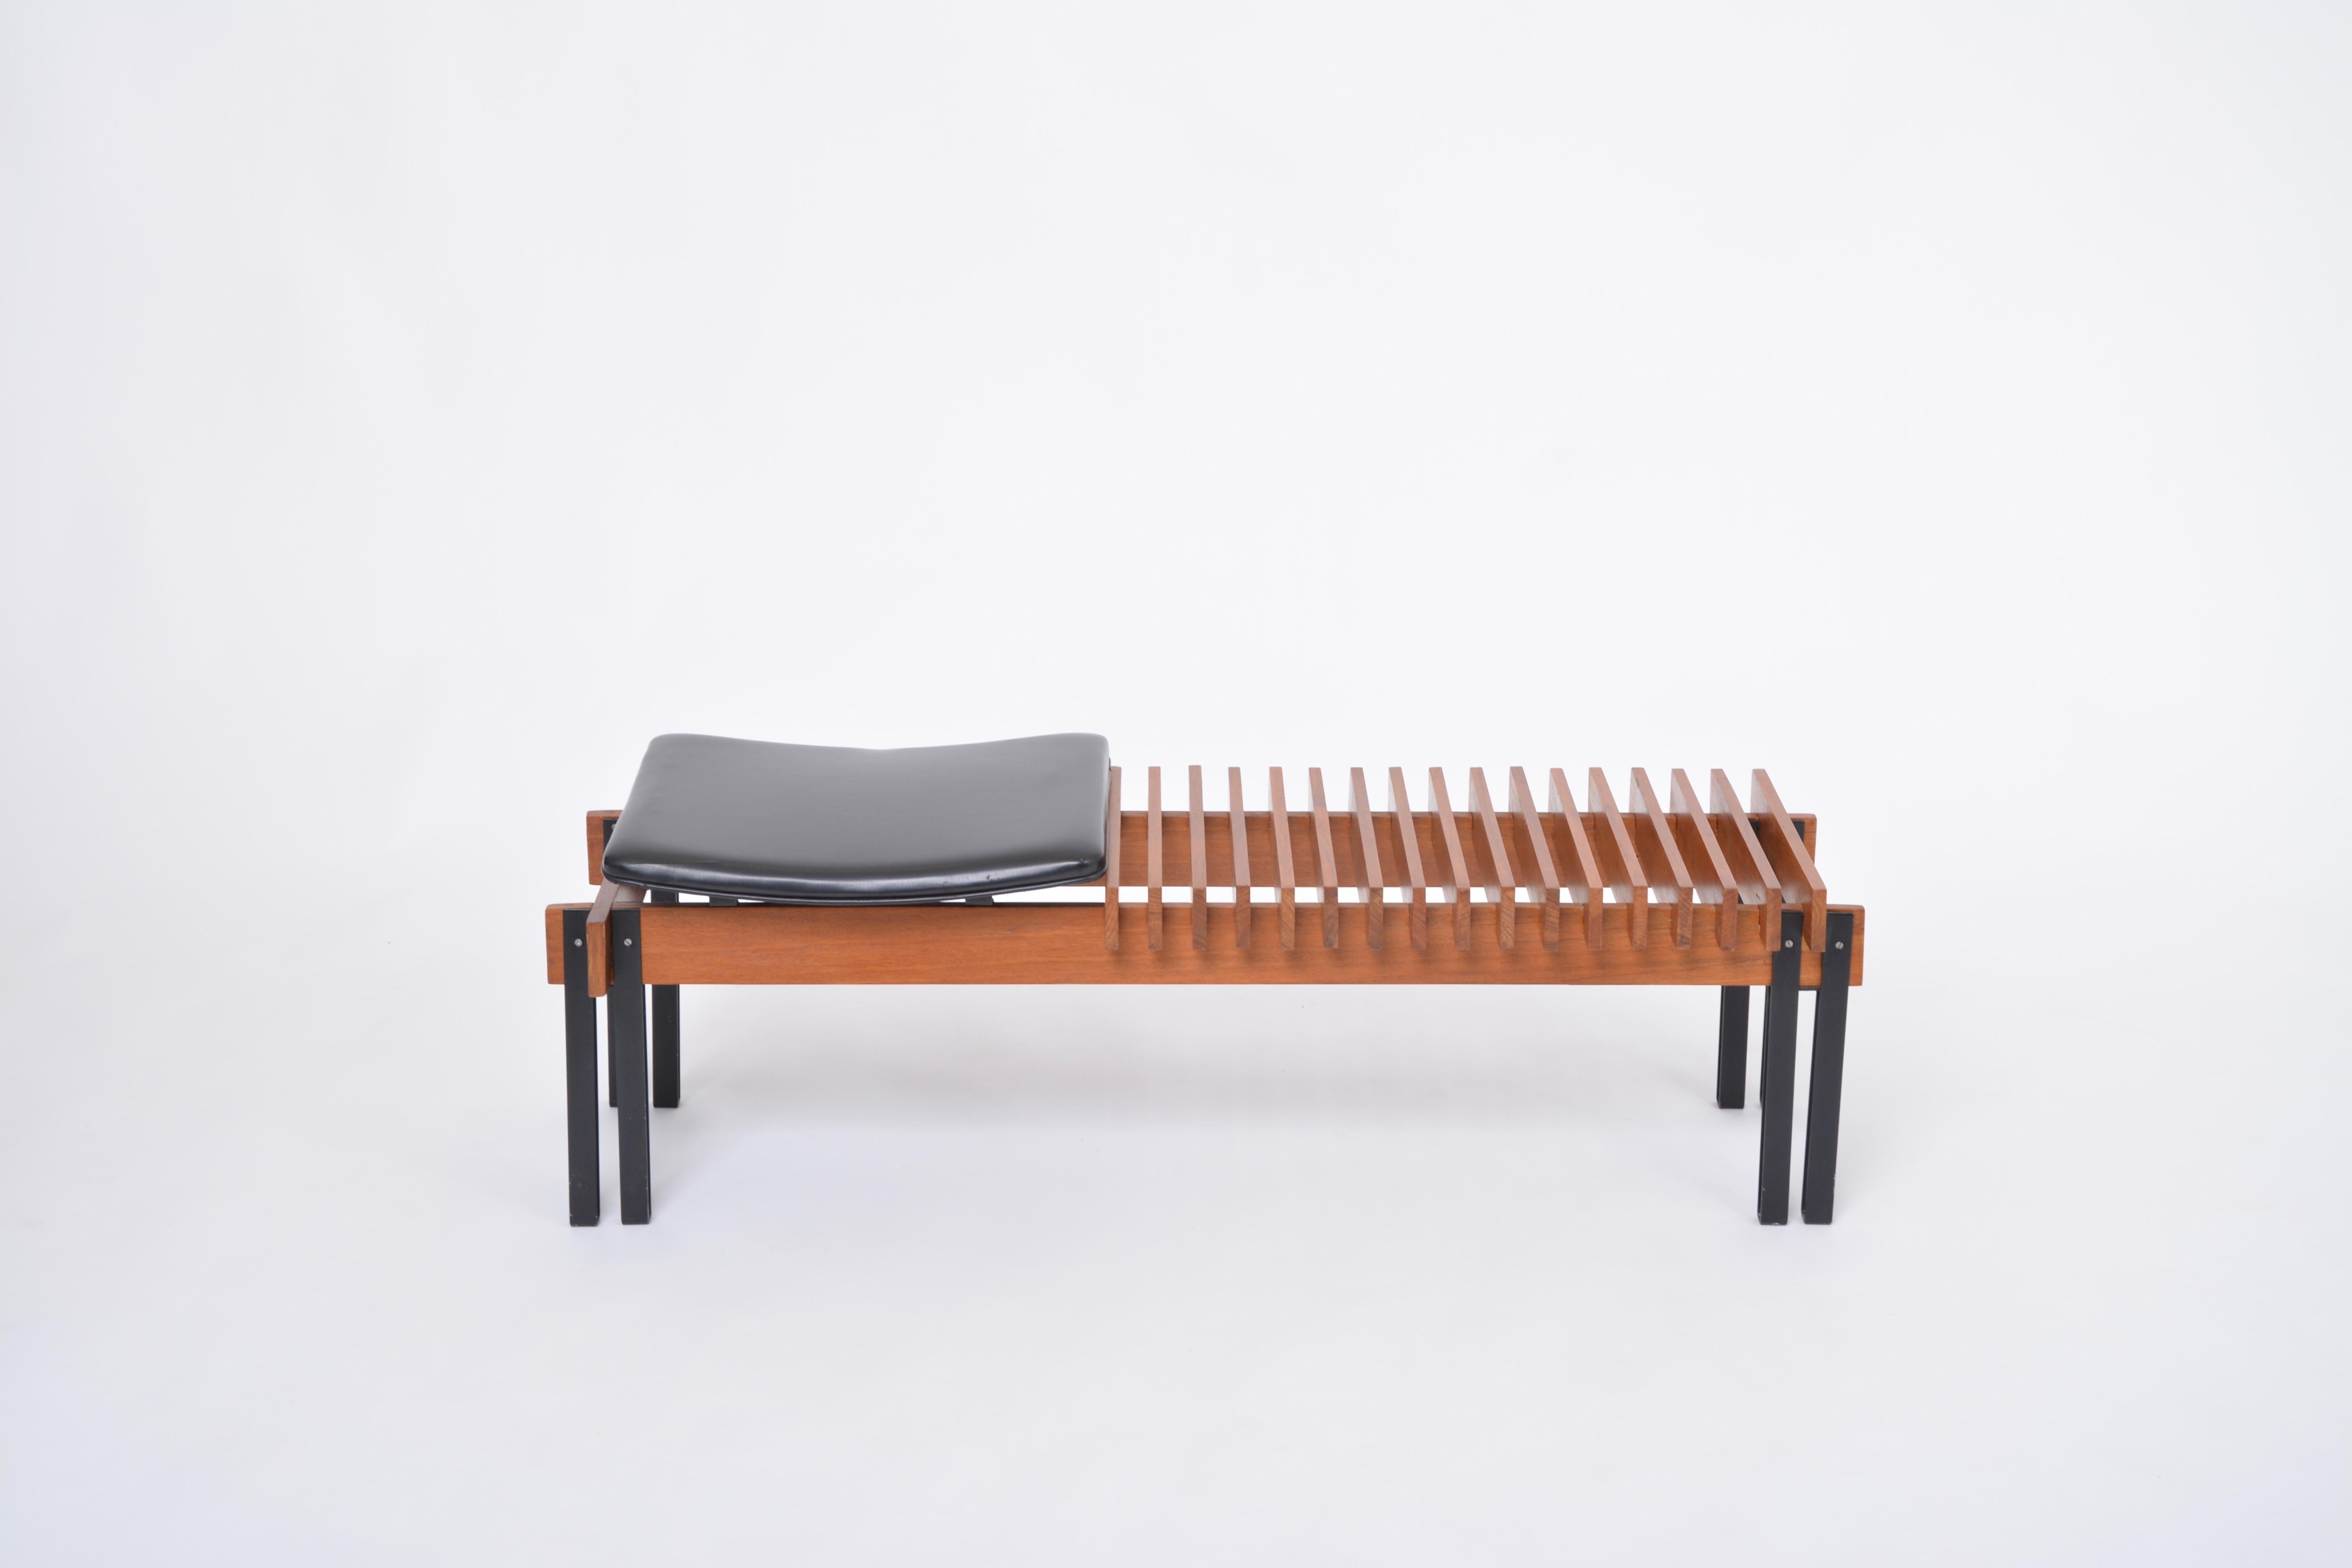 Mid-Century Modern slatted Teak bench by Inge and Luciano Rubino for Apec
This bench is one of the few objects the Danish - Italian couple Inge and Luciano Rubino designed. As there these have not been produced in large numbers, today their designs